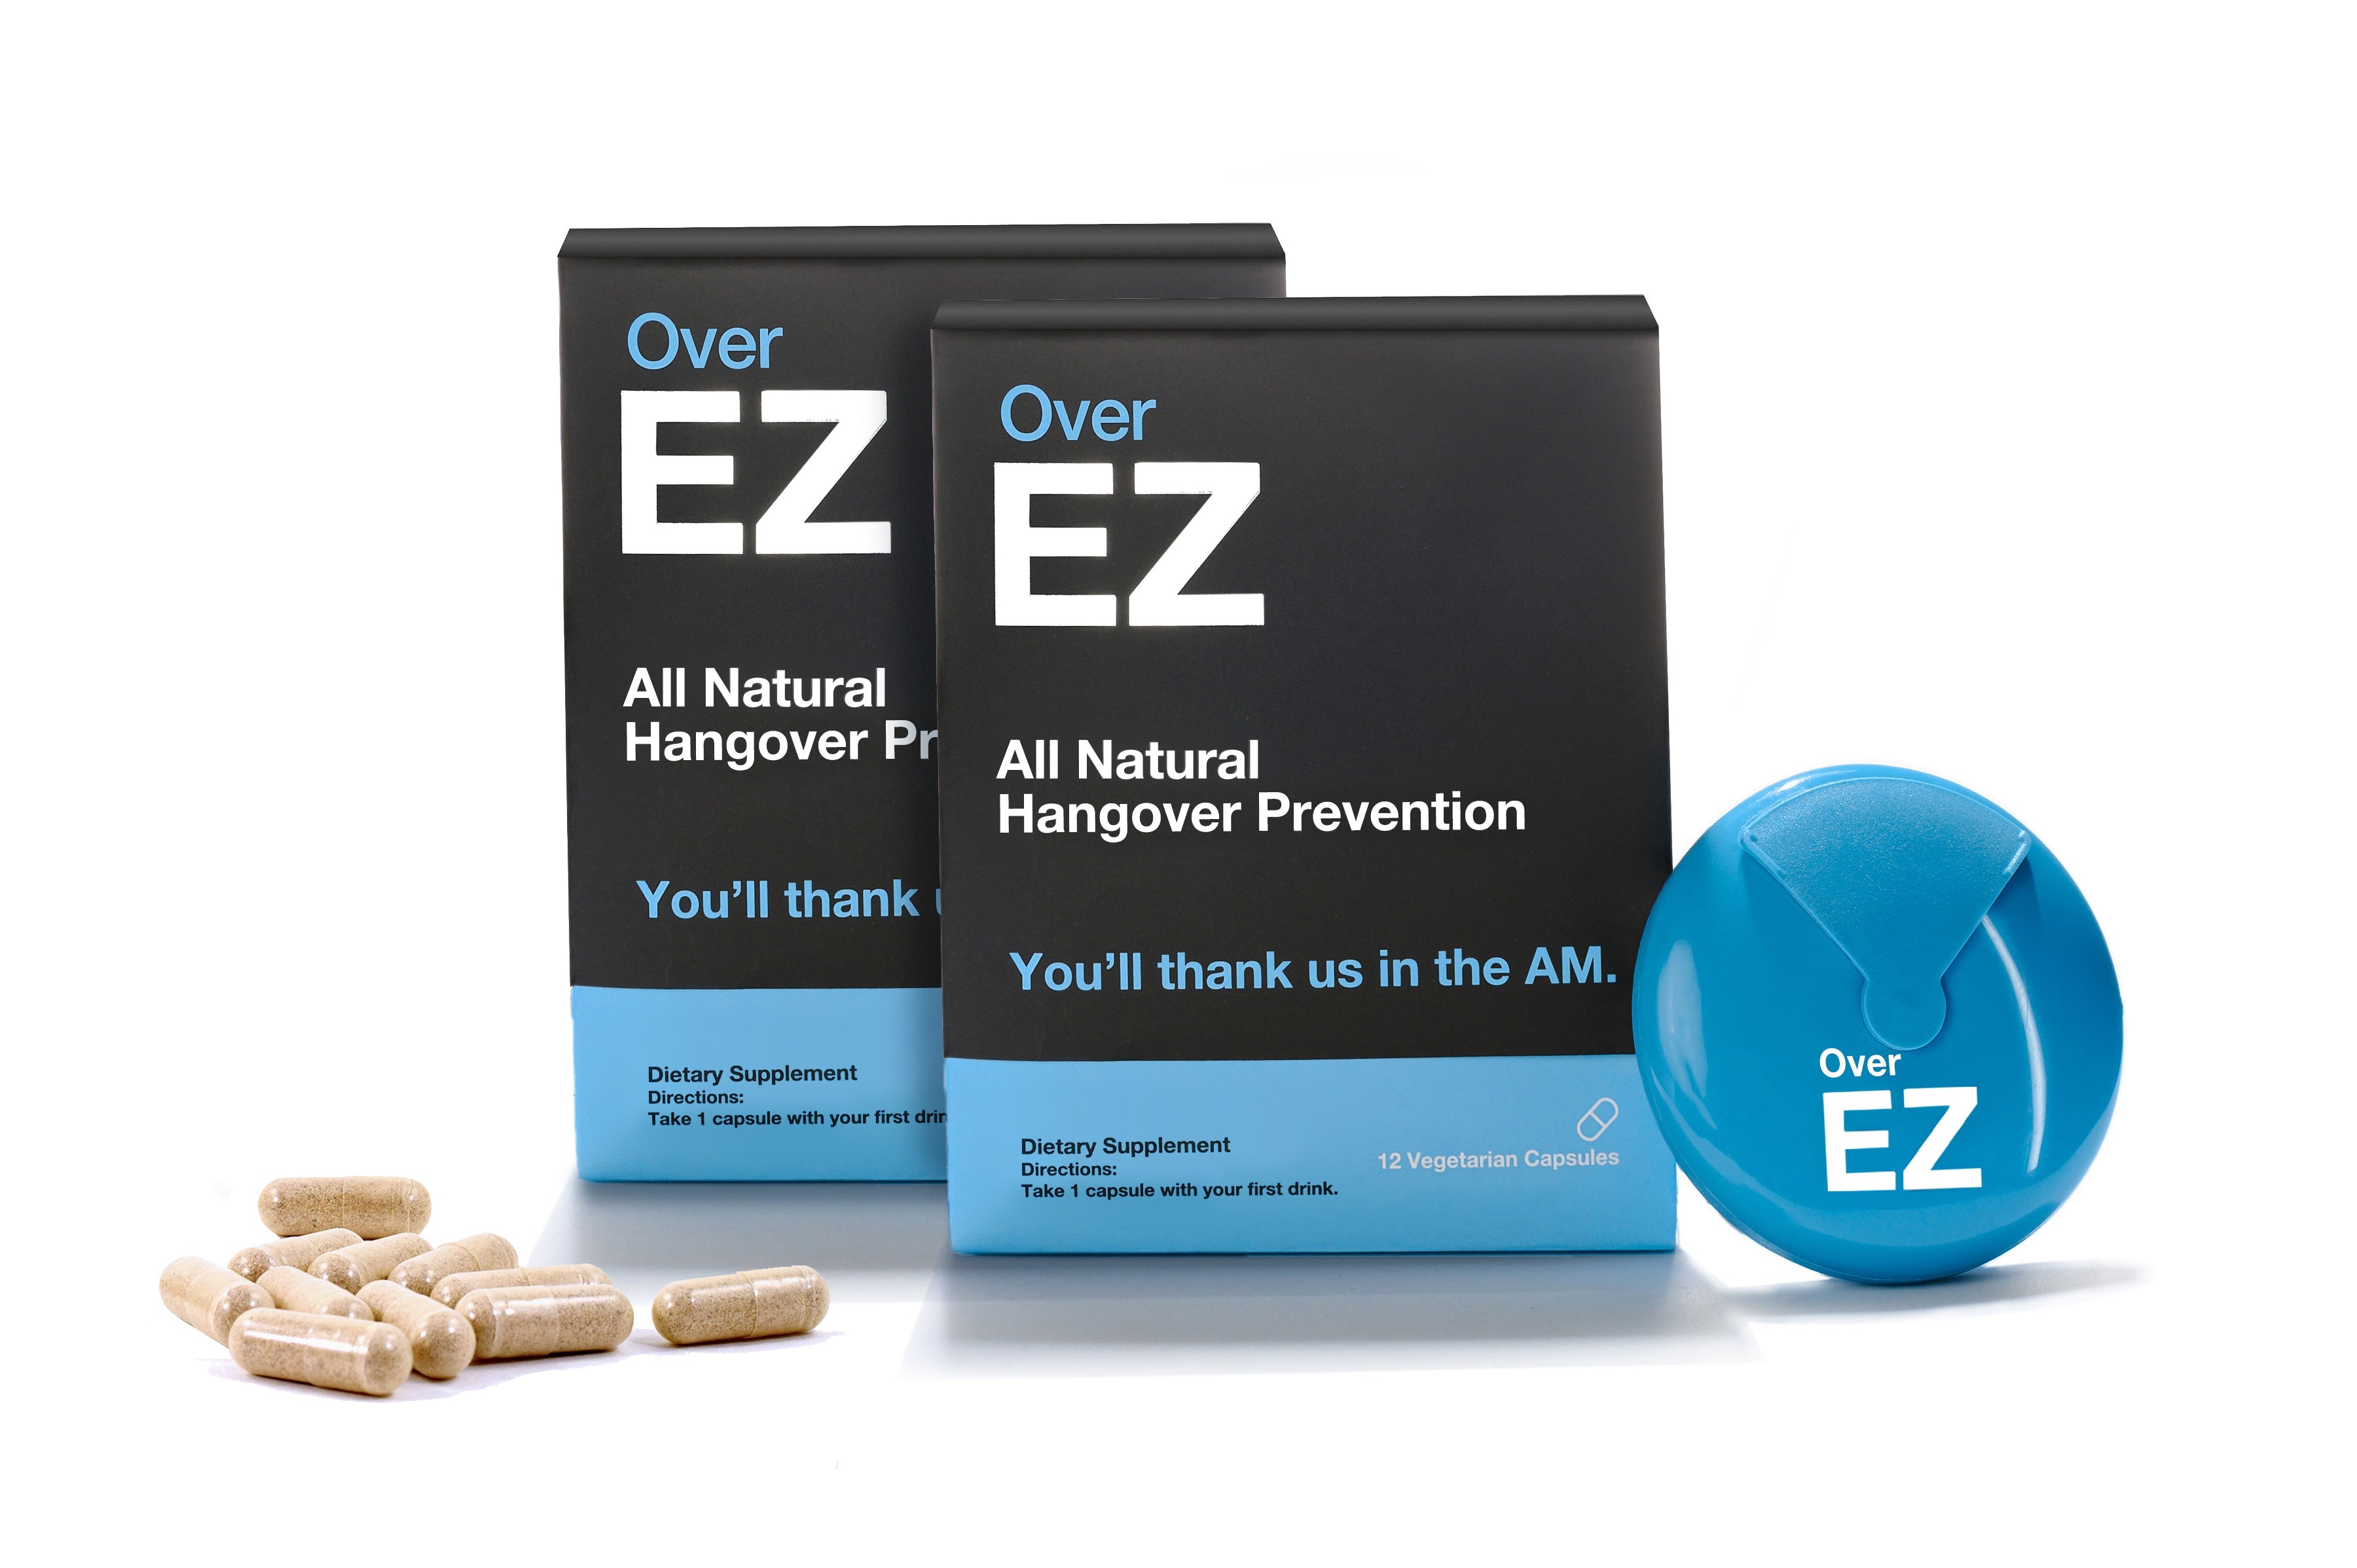  Over EZ - Hangover Prevention USA - 40% Off by EZ Lifestyle EZ Lifestyle Perfumarie